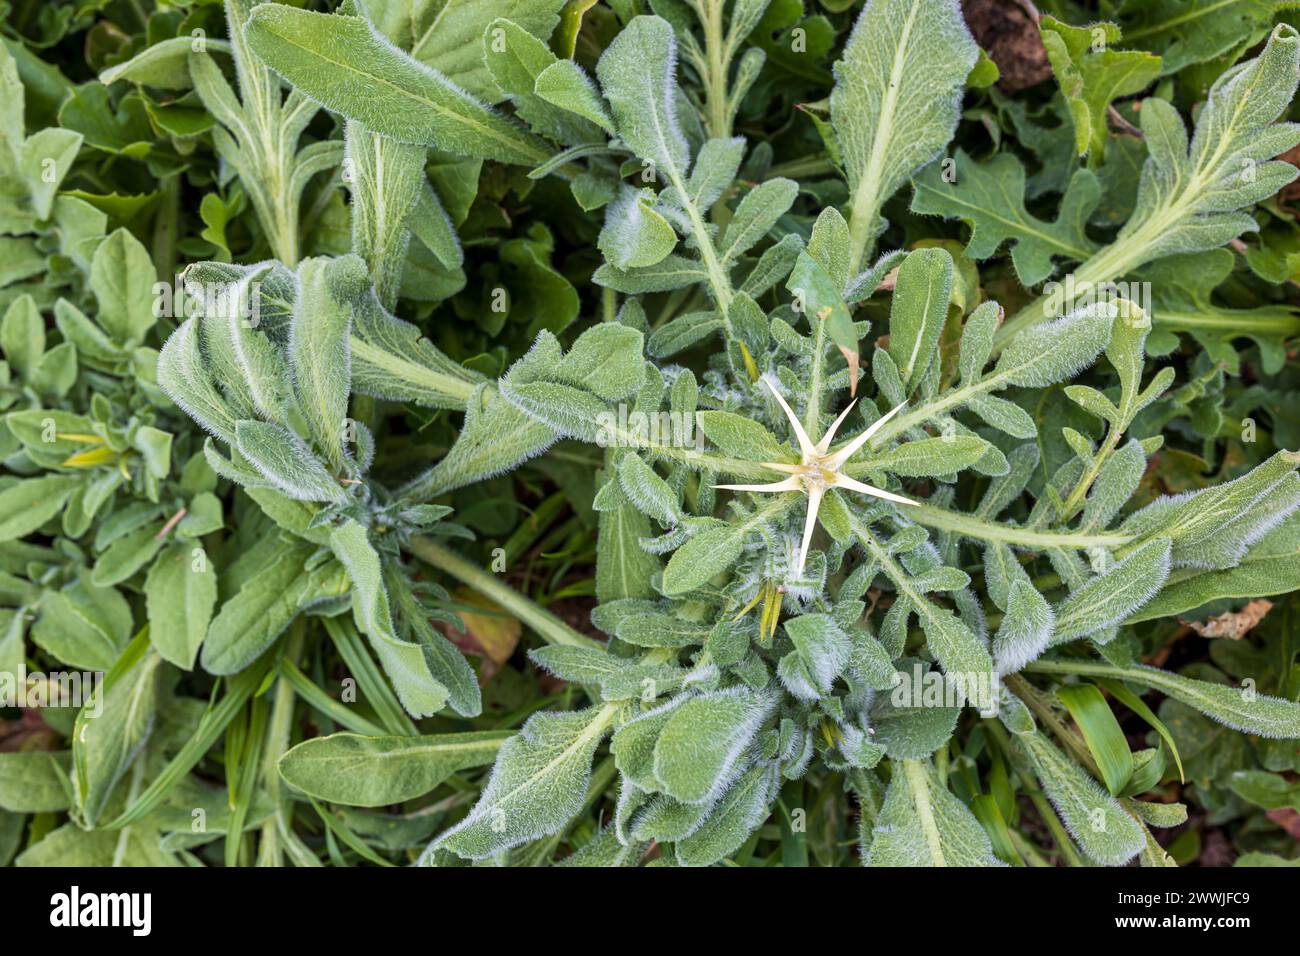 Centaurea calcitrapa is a species of flowering plant known by several common names, including red star-thistle and purple star thistle. Stock Photo